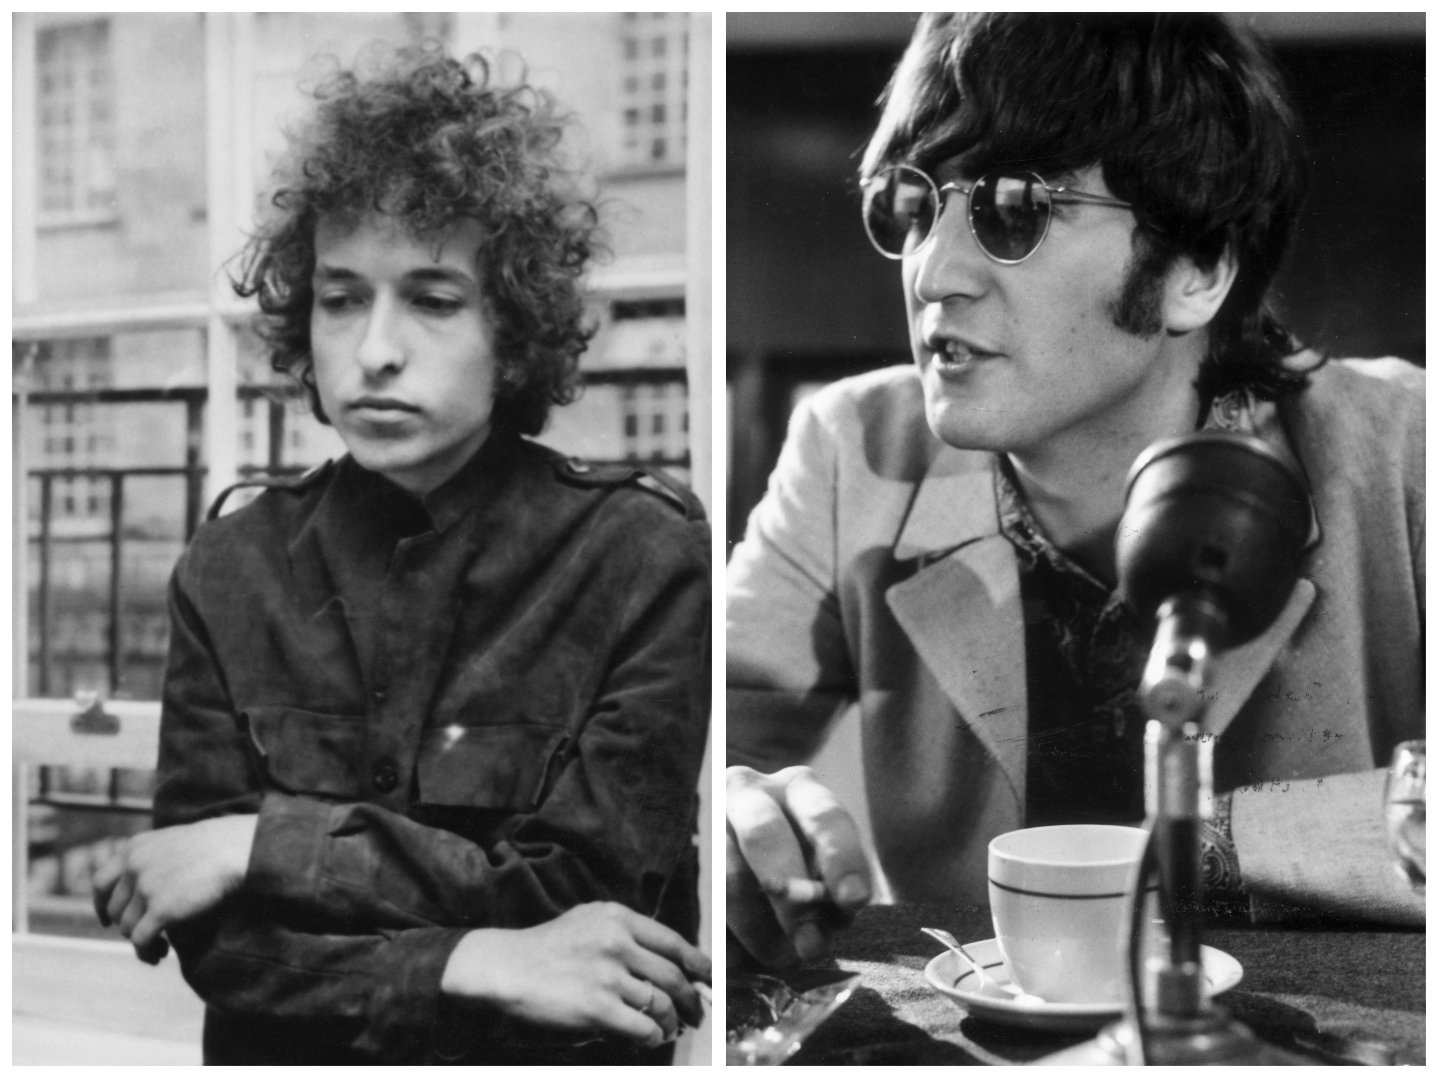 A black and white picture of Bob Dylan leaning against a window sill. John Lennon sits at a table in front of a microphone.